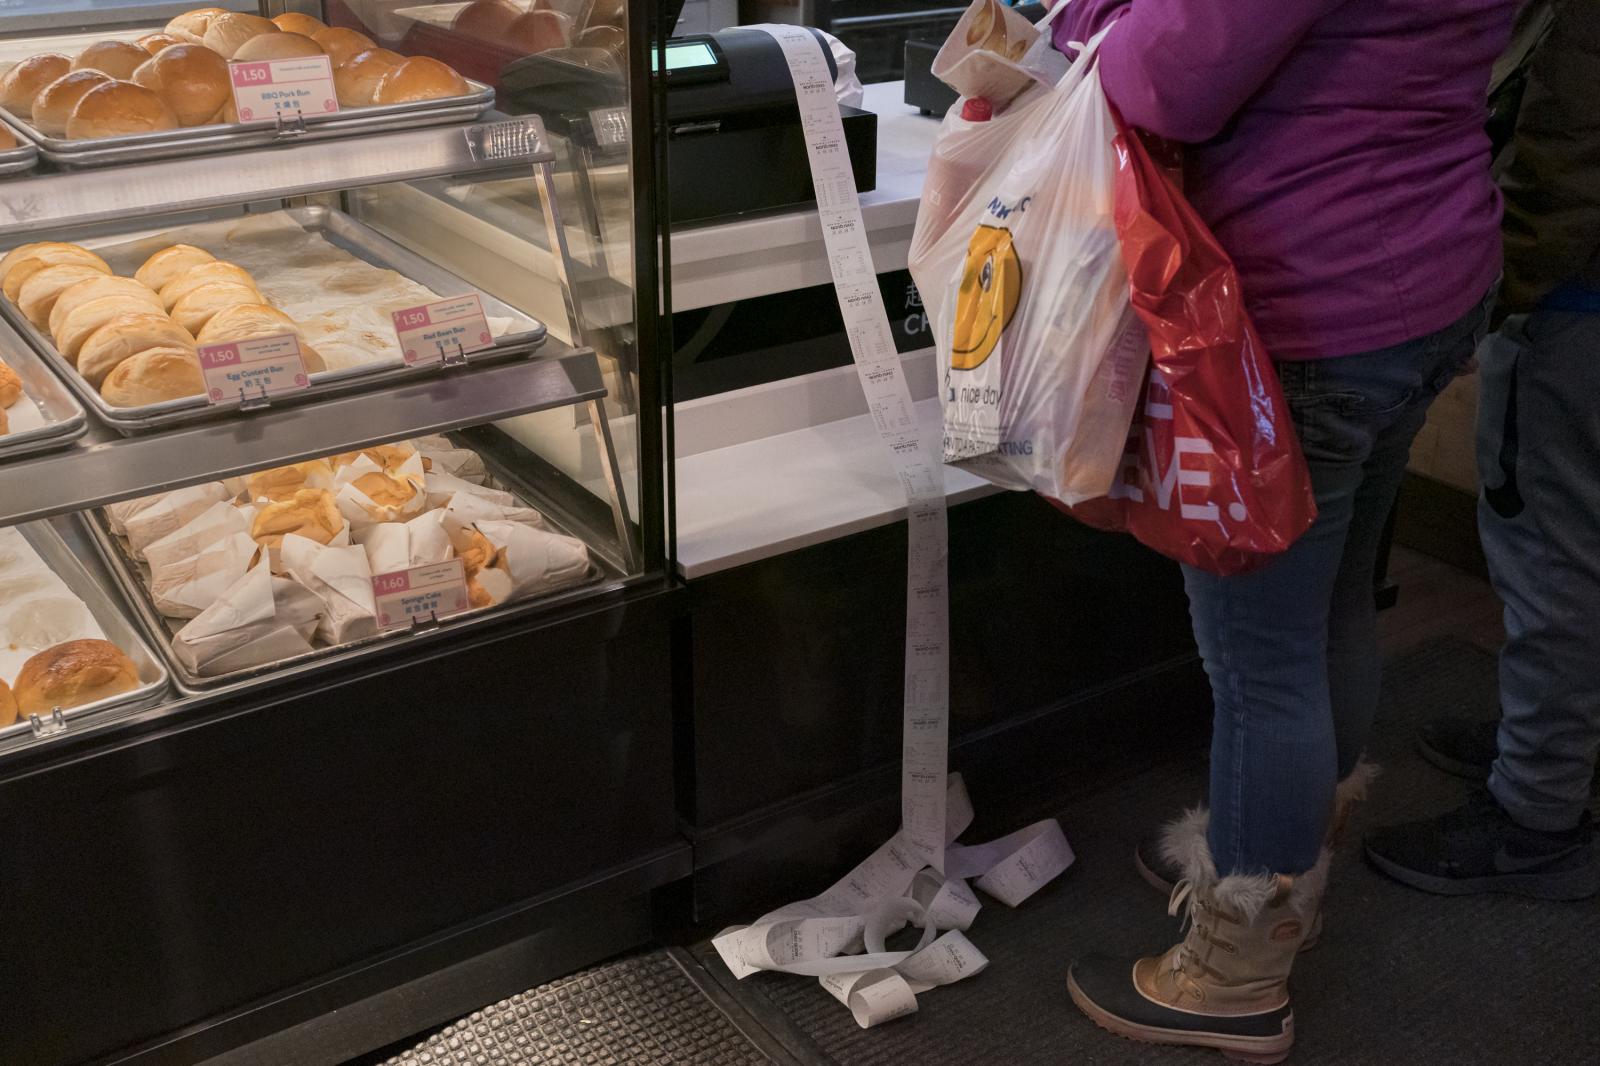 Image from Singles - CHICAGO, IL - JANUARY 22: A long strip of receipts...